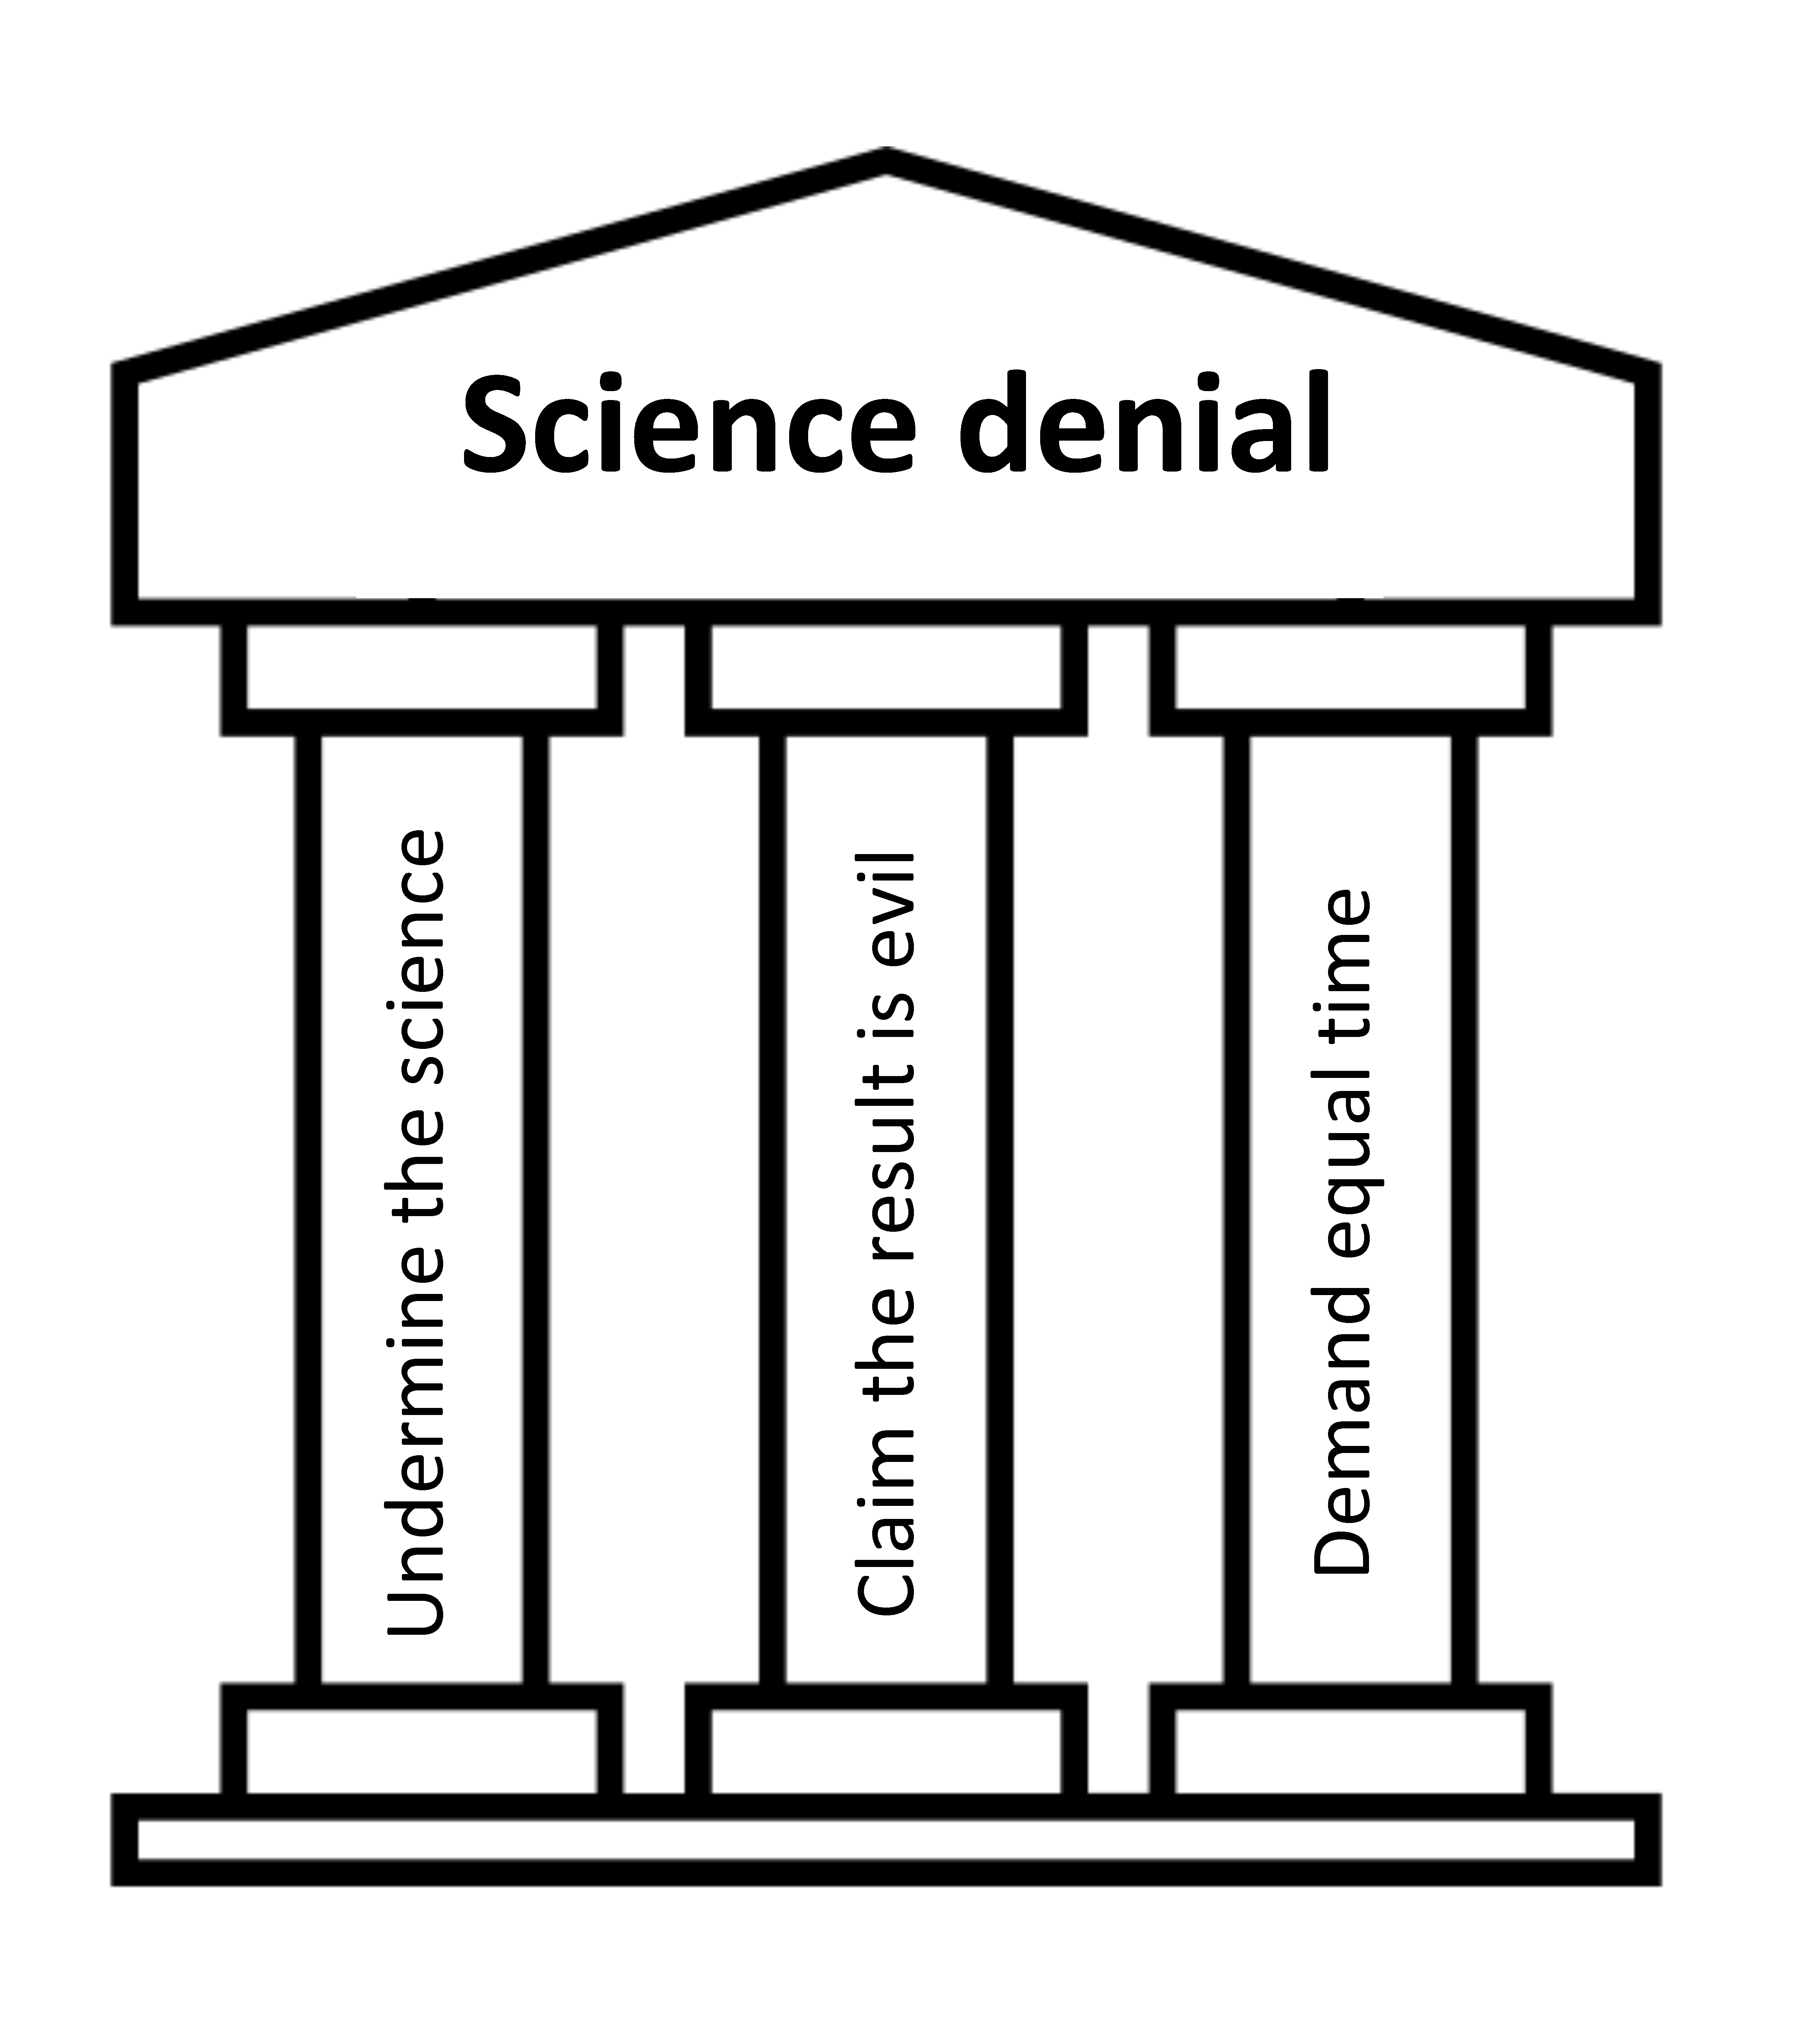 Shows three pillars labeled "Undermine the Science", "Claim the Result is Evil", and "Demand Equal Time".